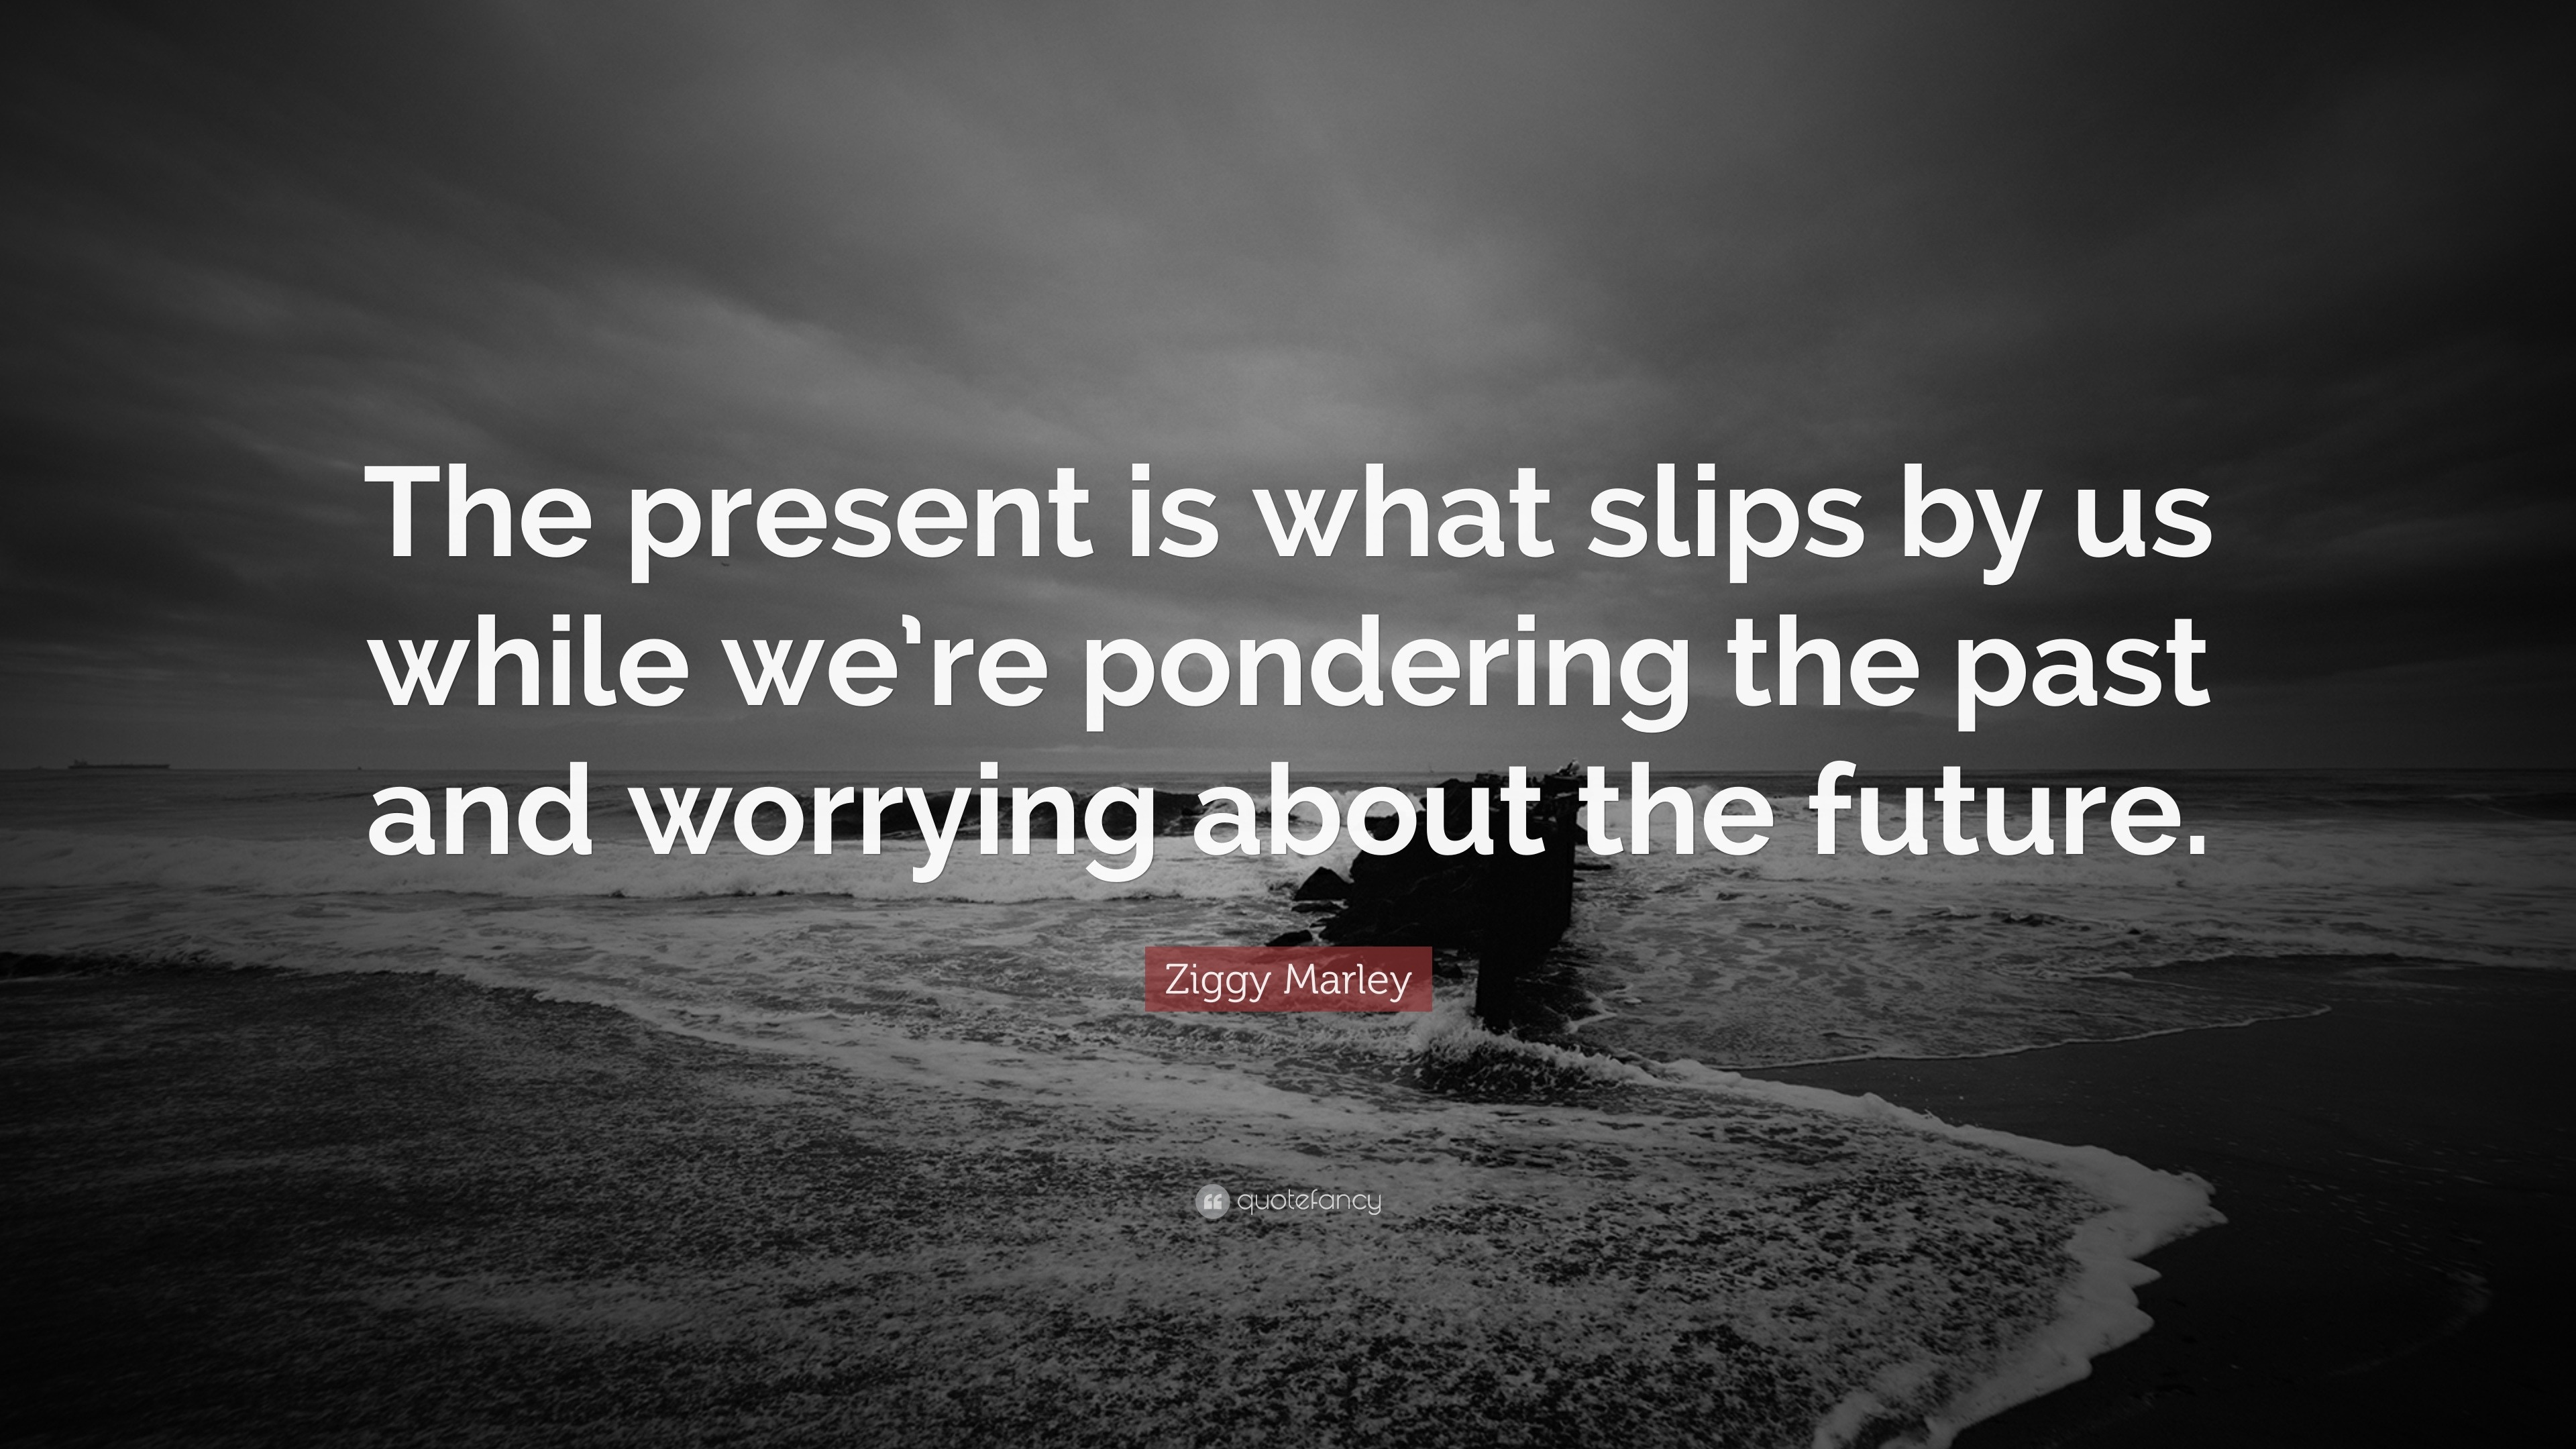 Ziggy Marley Quote: “The present is what slips by us while we’re ...